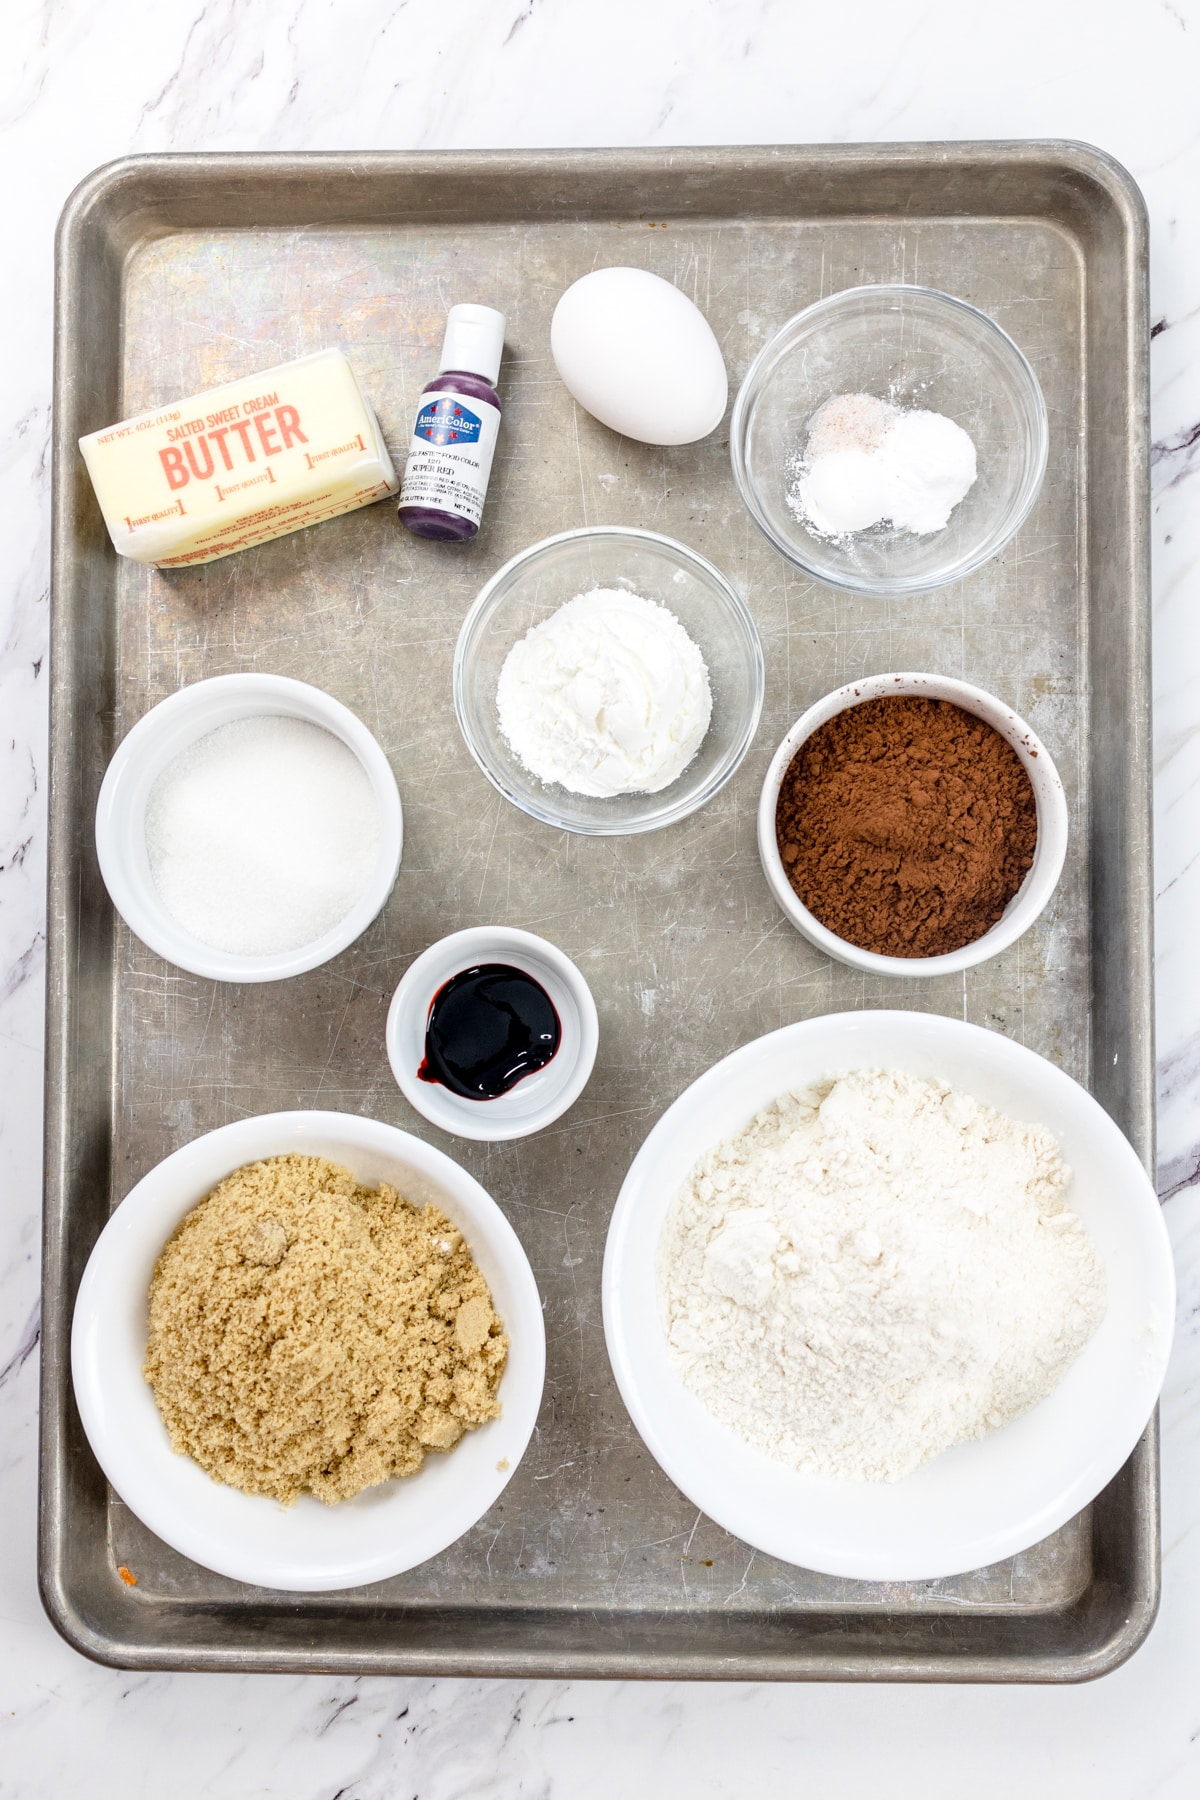 Top view of ingredients needed to make Red Velvet Cookies with Cream Cheese Frosting in small bowls on a baking tray.